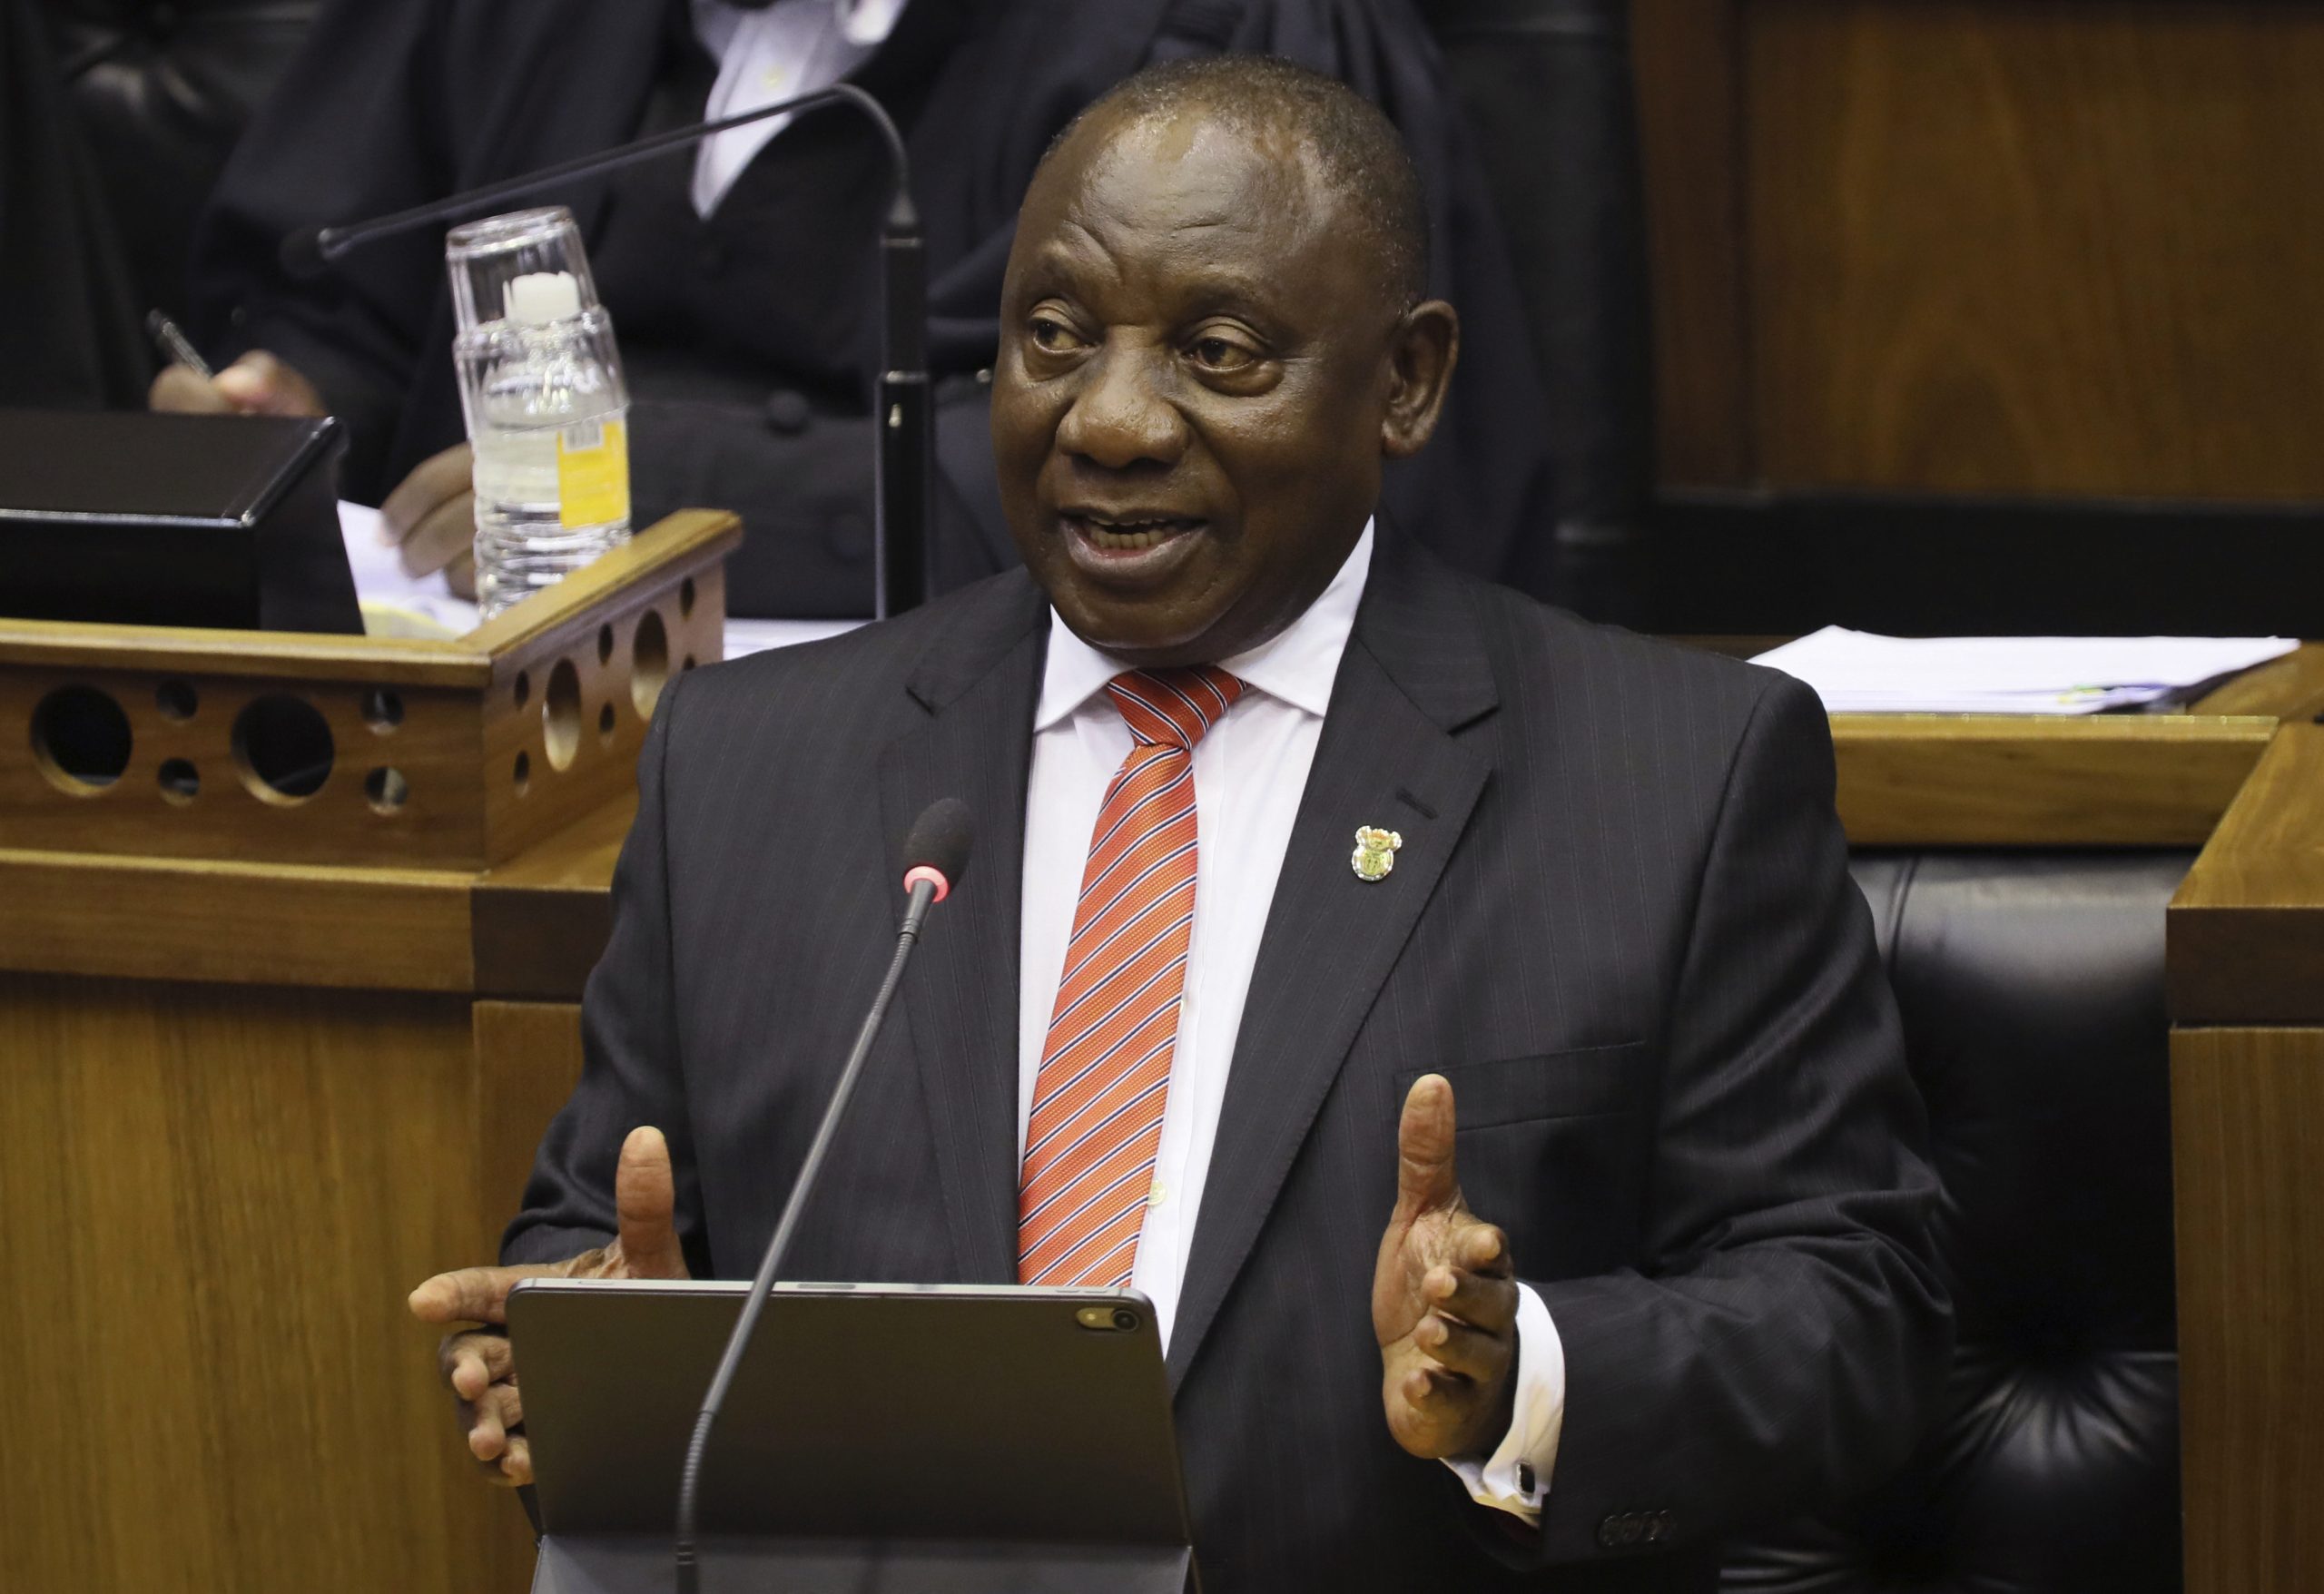 South African president blames NATO for Russia’s invasion of Ukraine: ‘War could have been avoided’